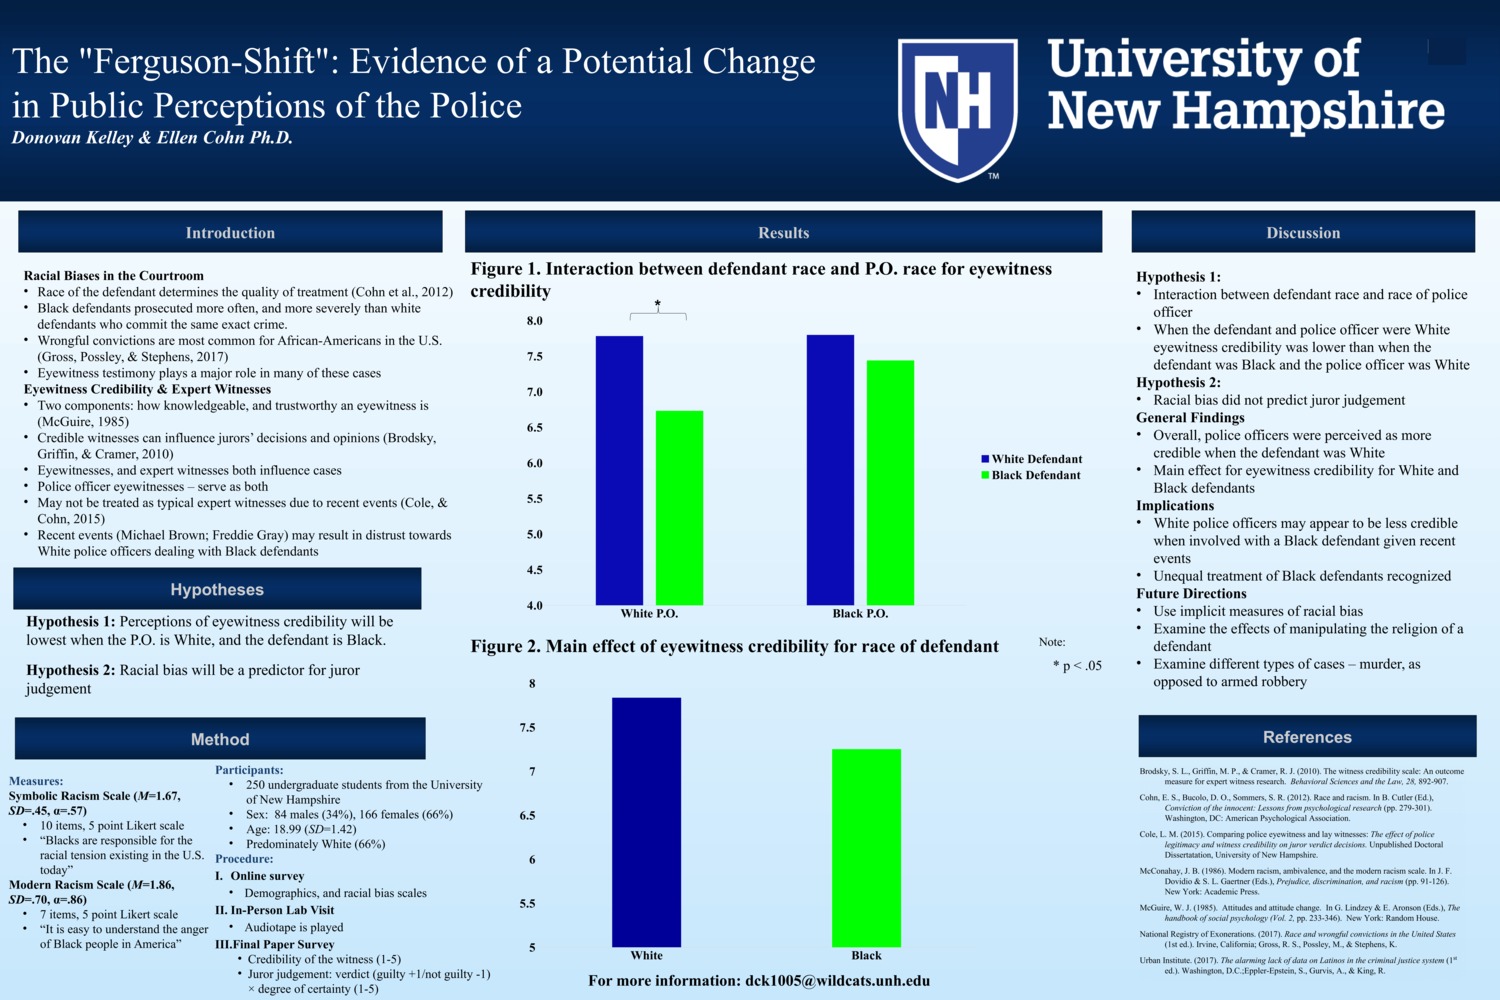 The "Ferguson-Shift": Evidence Of A Potential Change In Public Perceptions Of The Police by dck1005